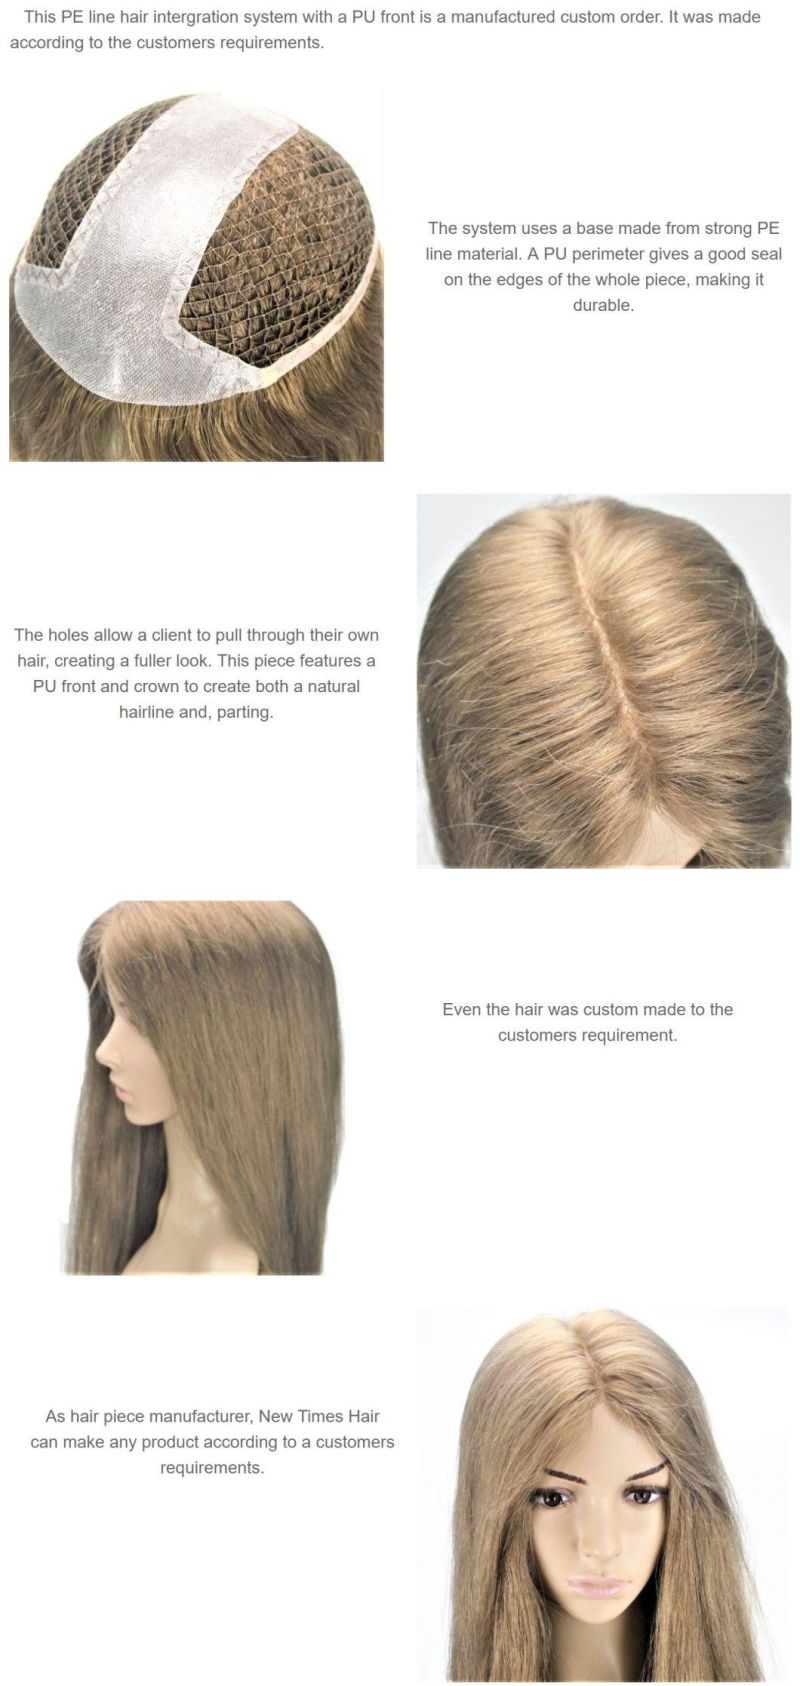 Custom Ladies PE Line Hair Integration System with PU Front